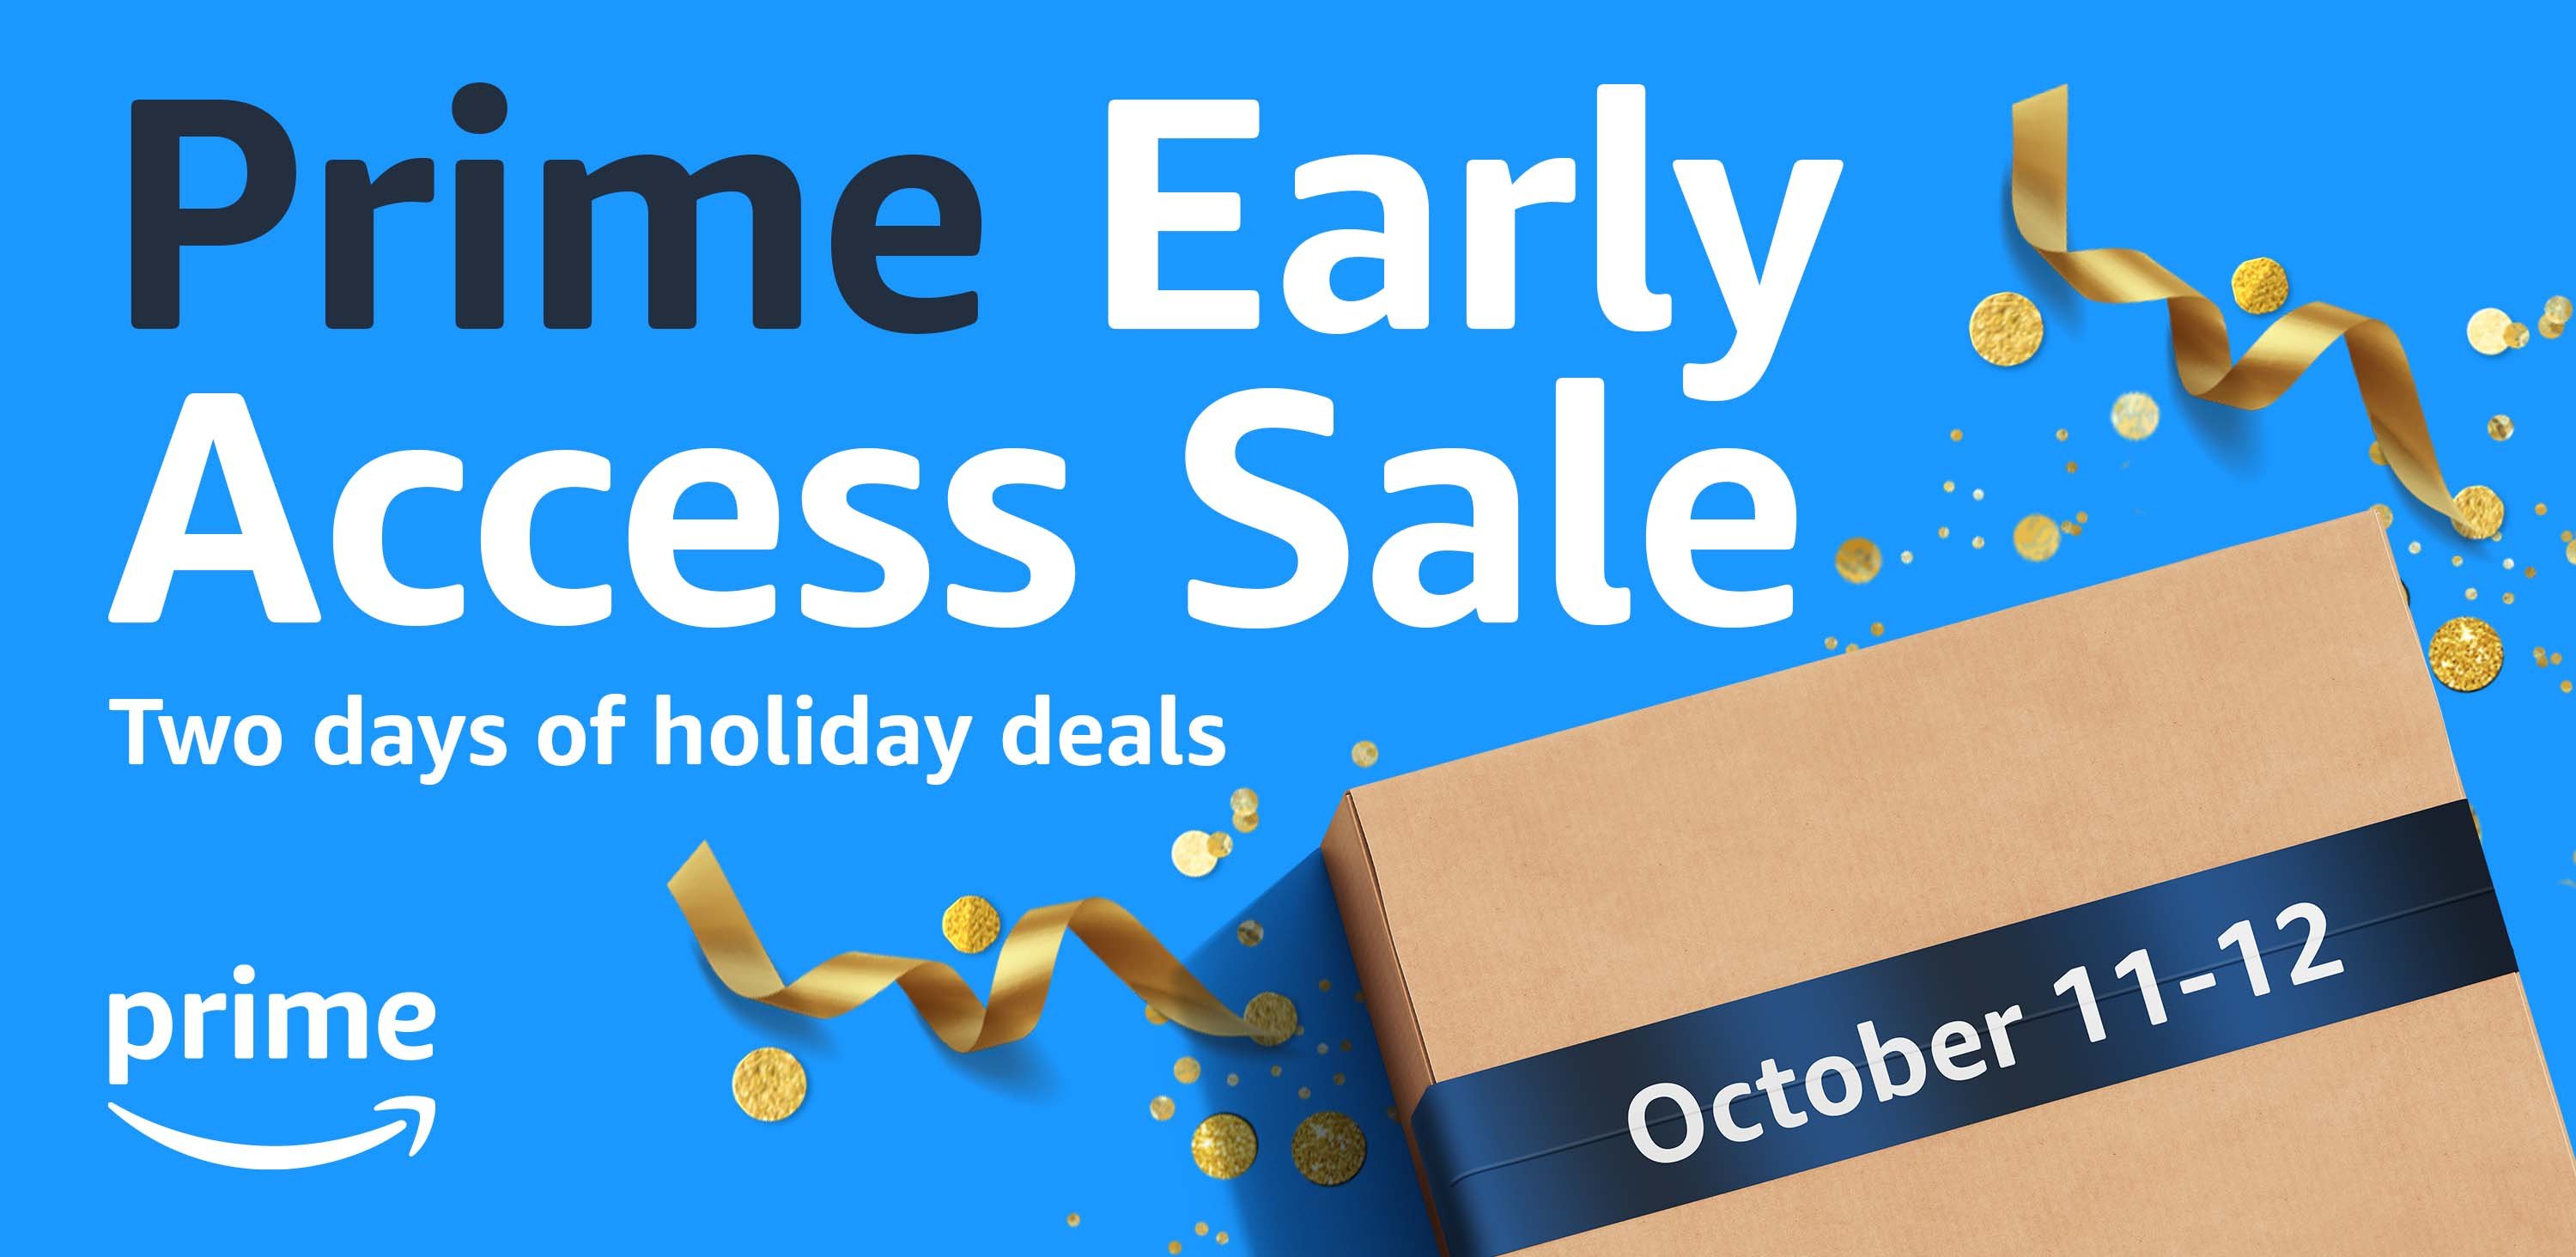 A new Amazon Prime sale event has been announced for October VGC